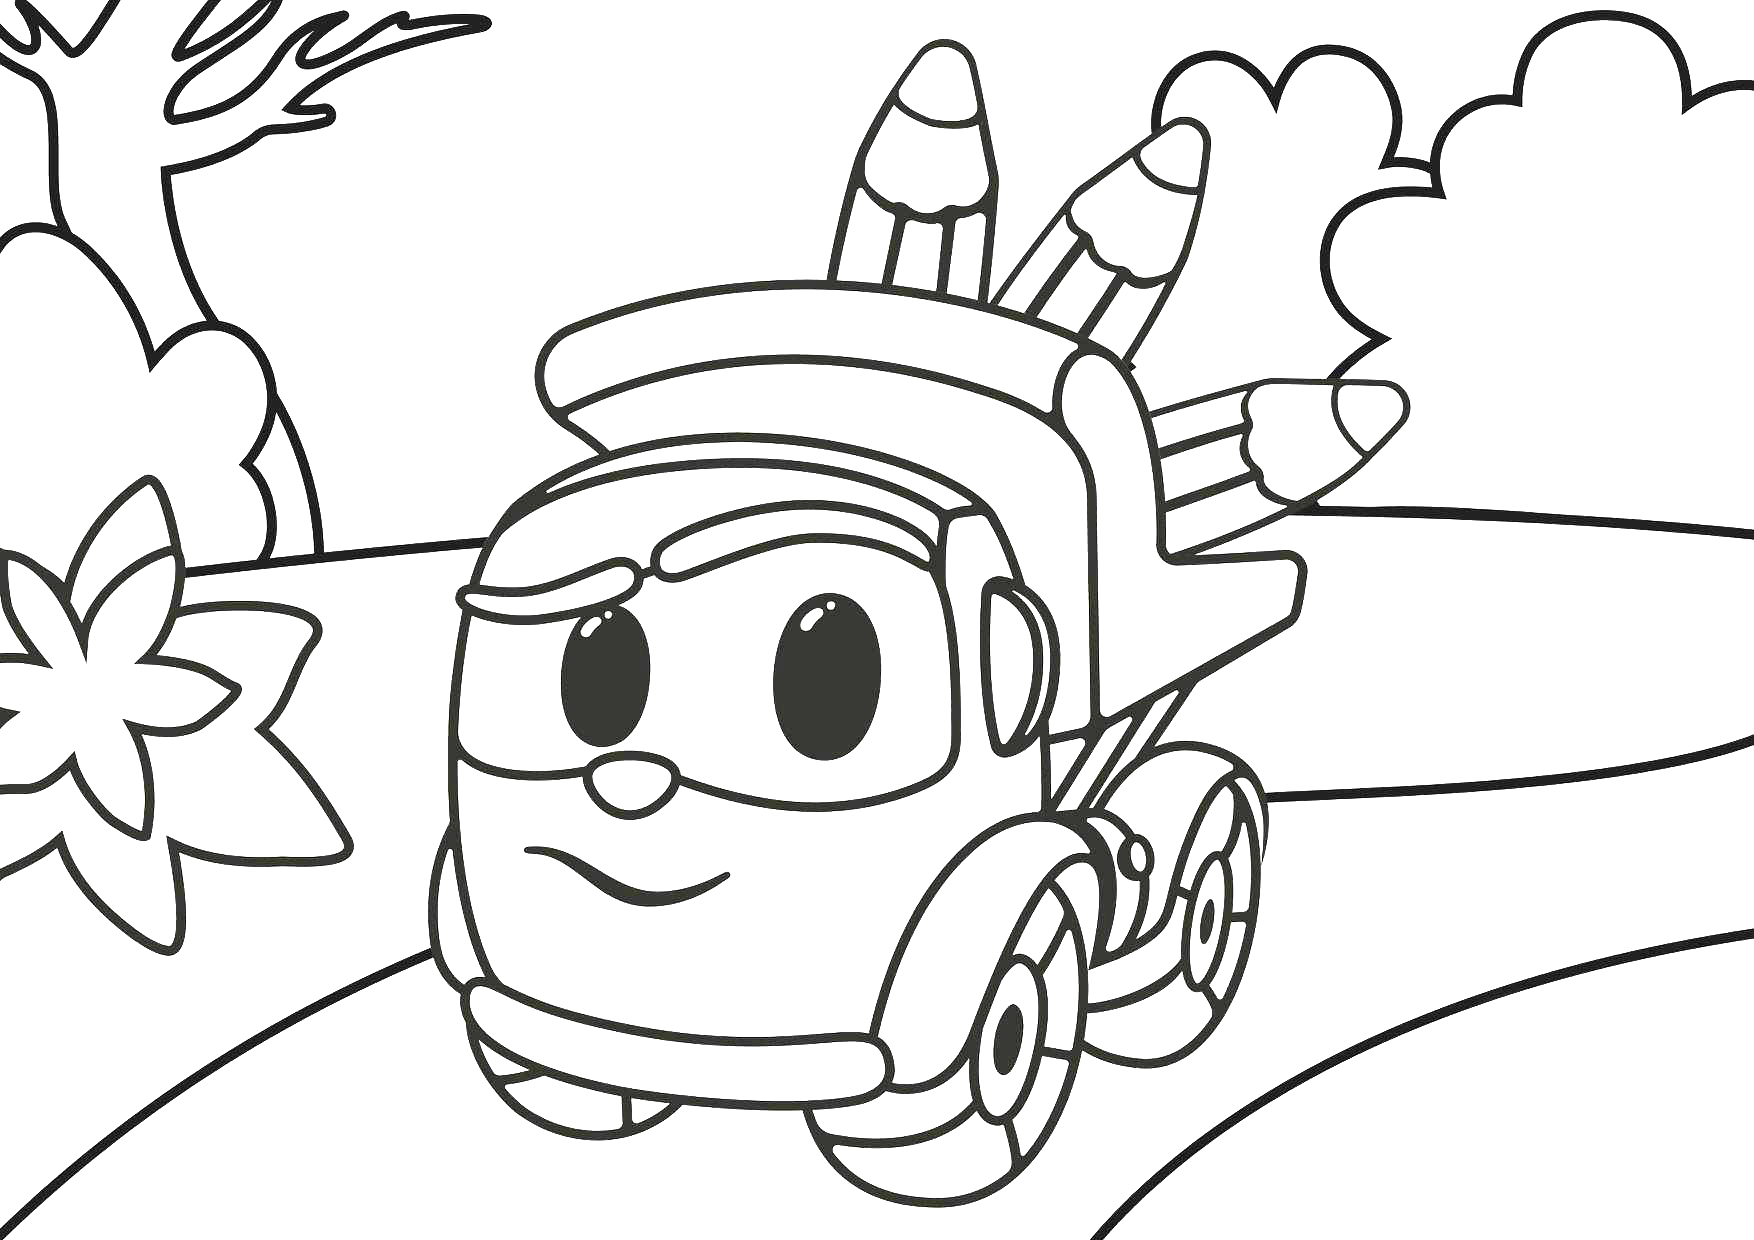 Leo the truck coloring page color leo lifty and scoop